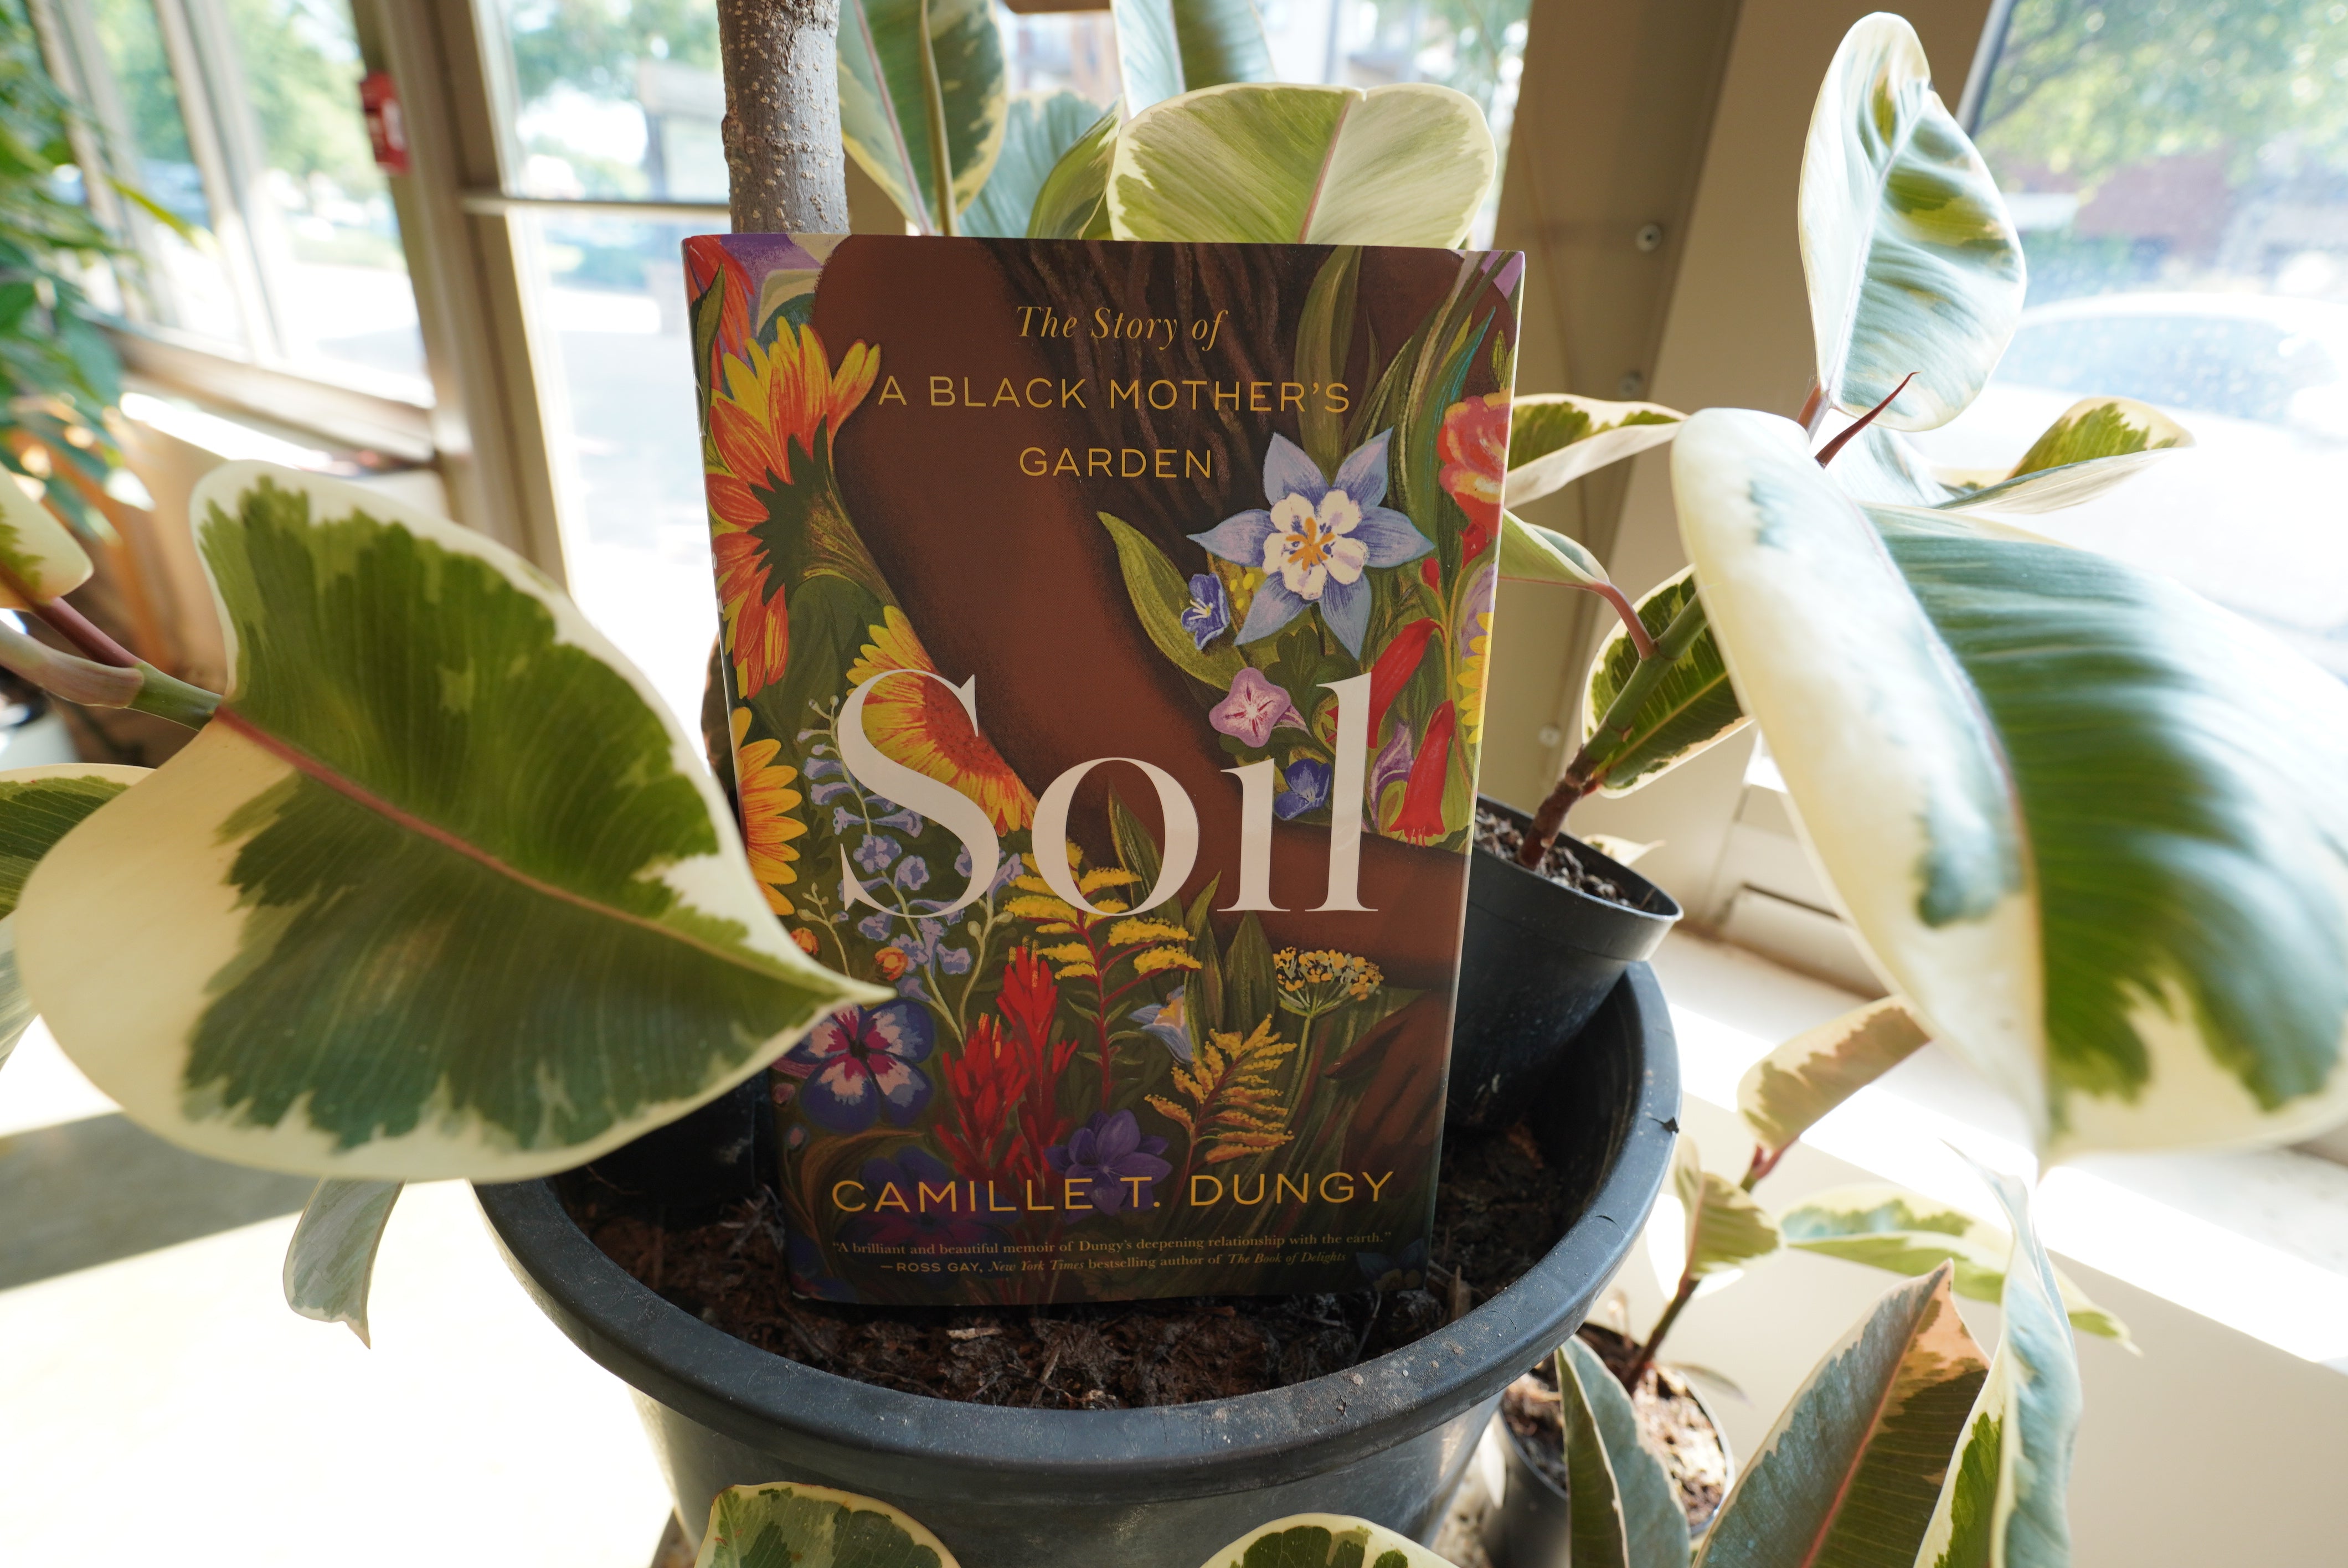 Soil by Camille T. Dungy